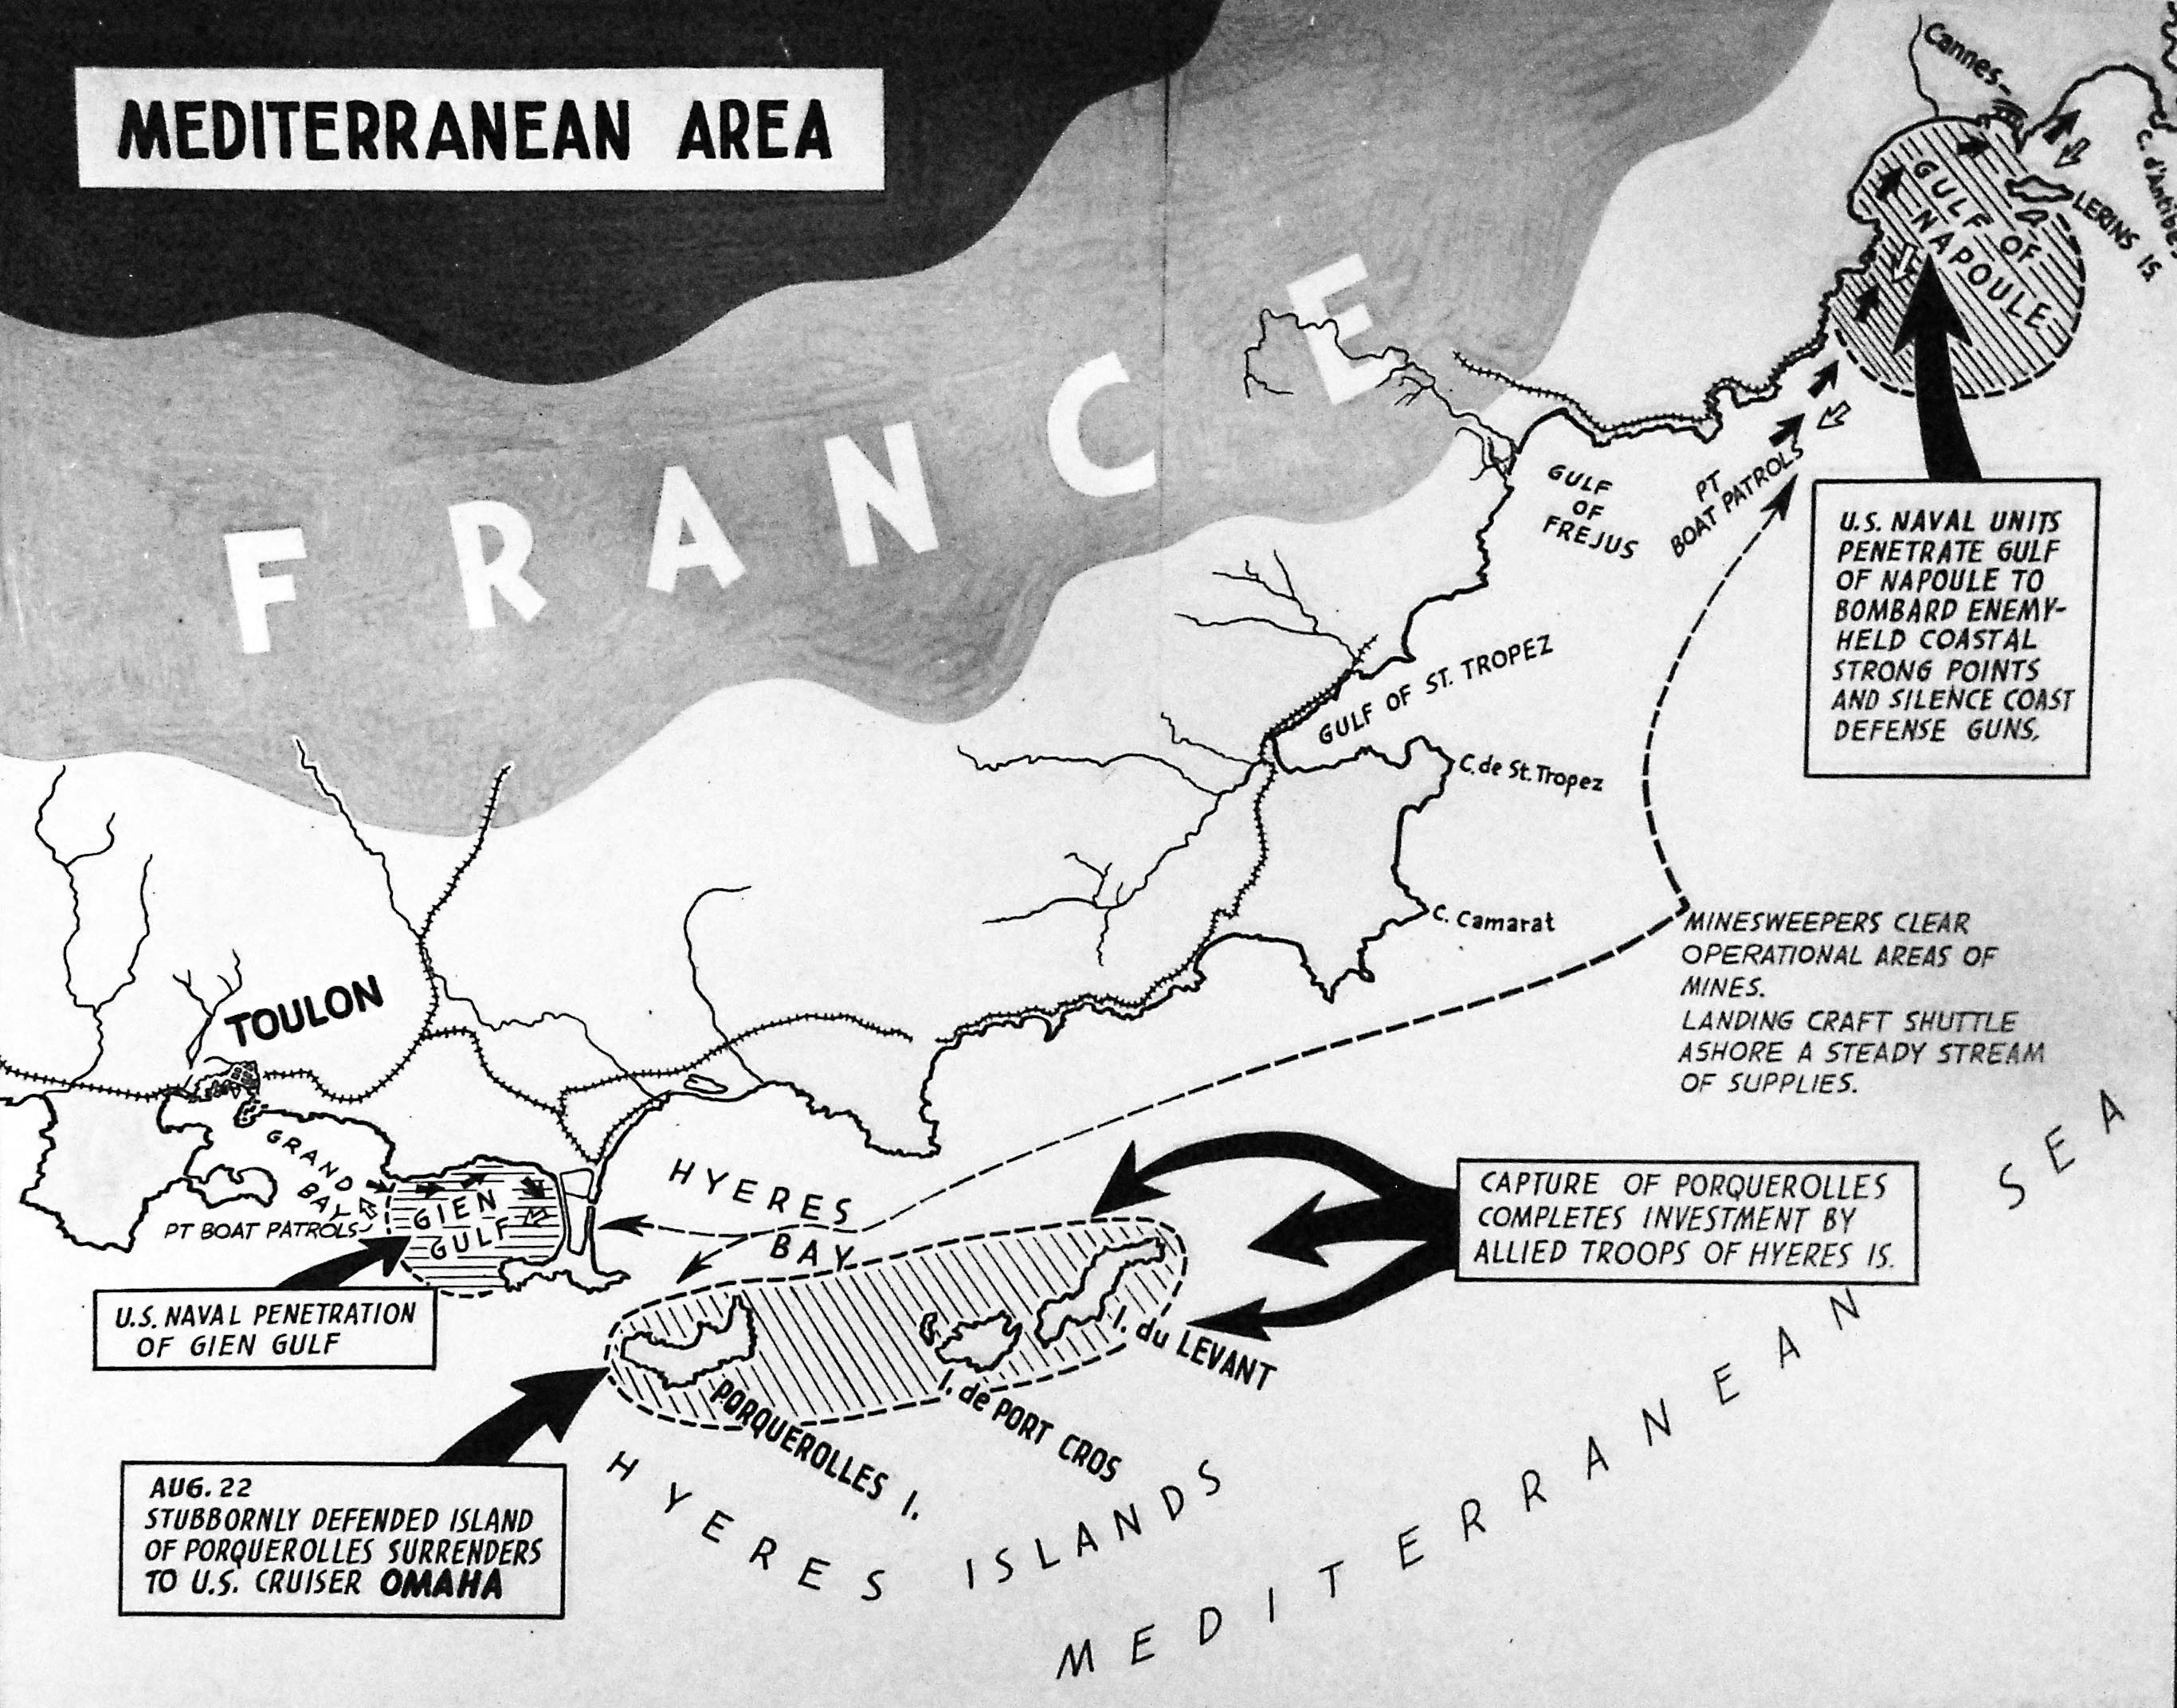 Strategic map of the United States Navy’s actions during the landings in Southern France, 15 Aug 1944.